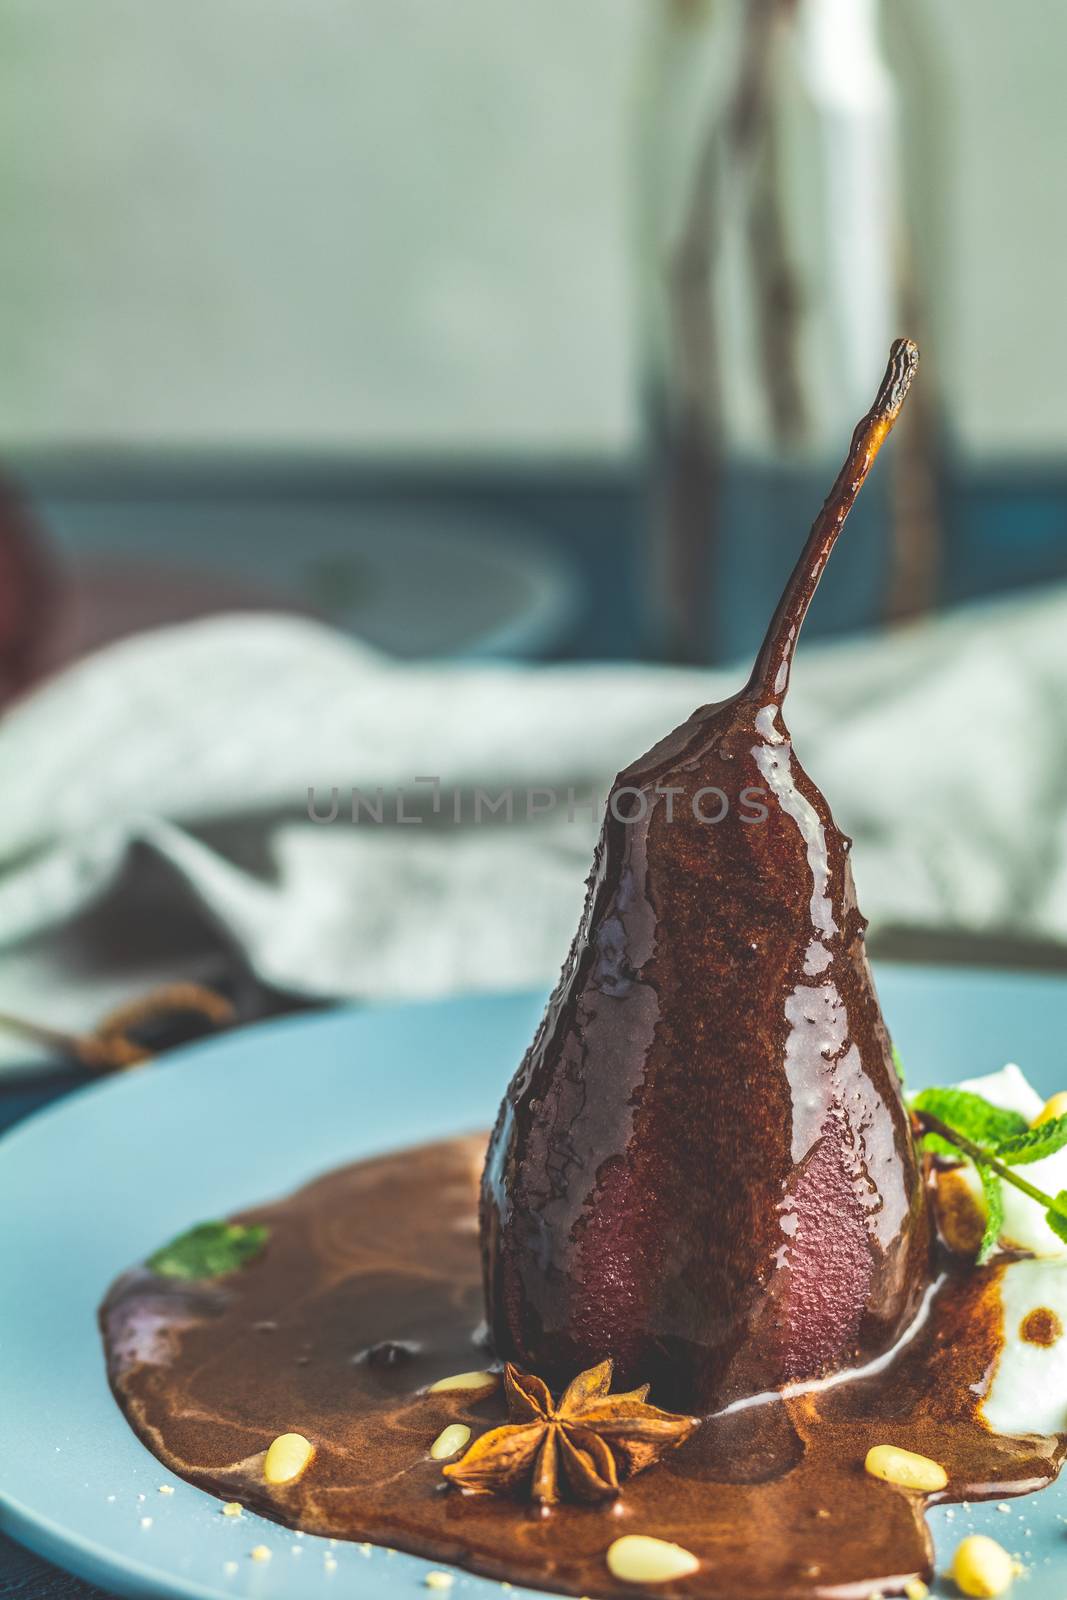 Pears in wine. Traditional dessert pears stewed in red wine with chocolate sauce on plate on blue concrete surface. Concept for romantic dinner dessert